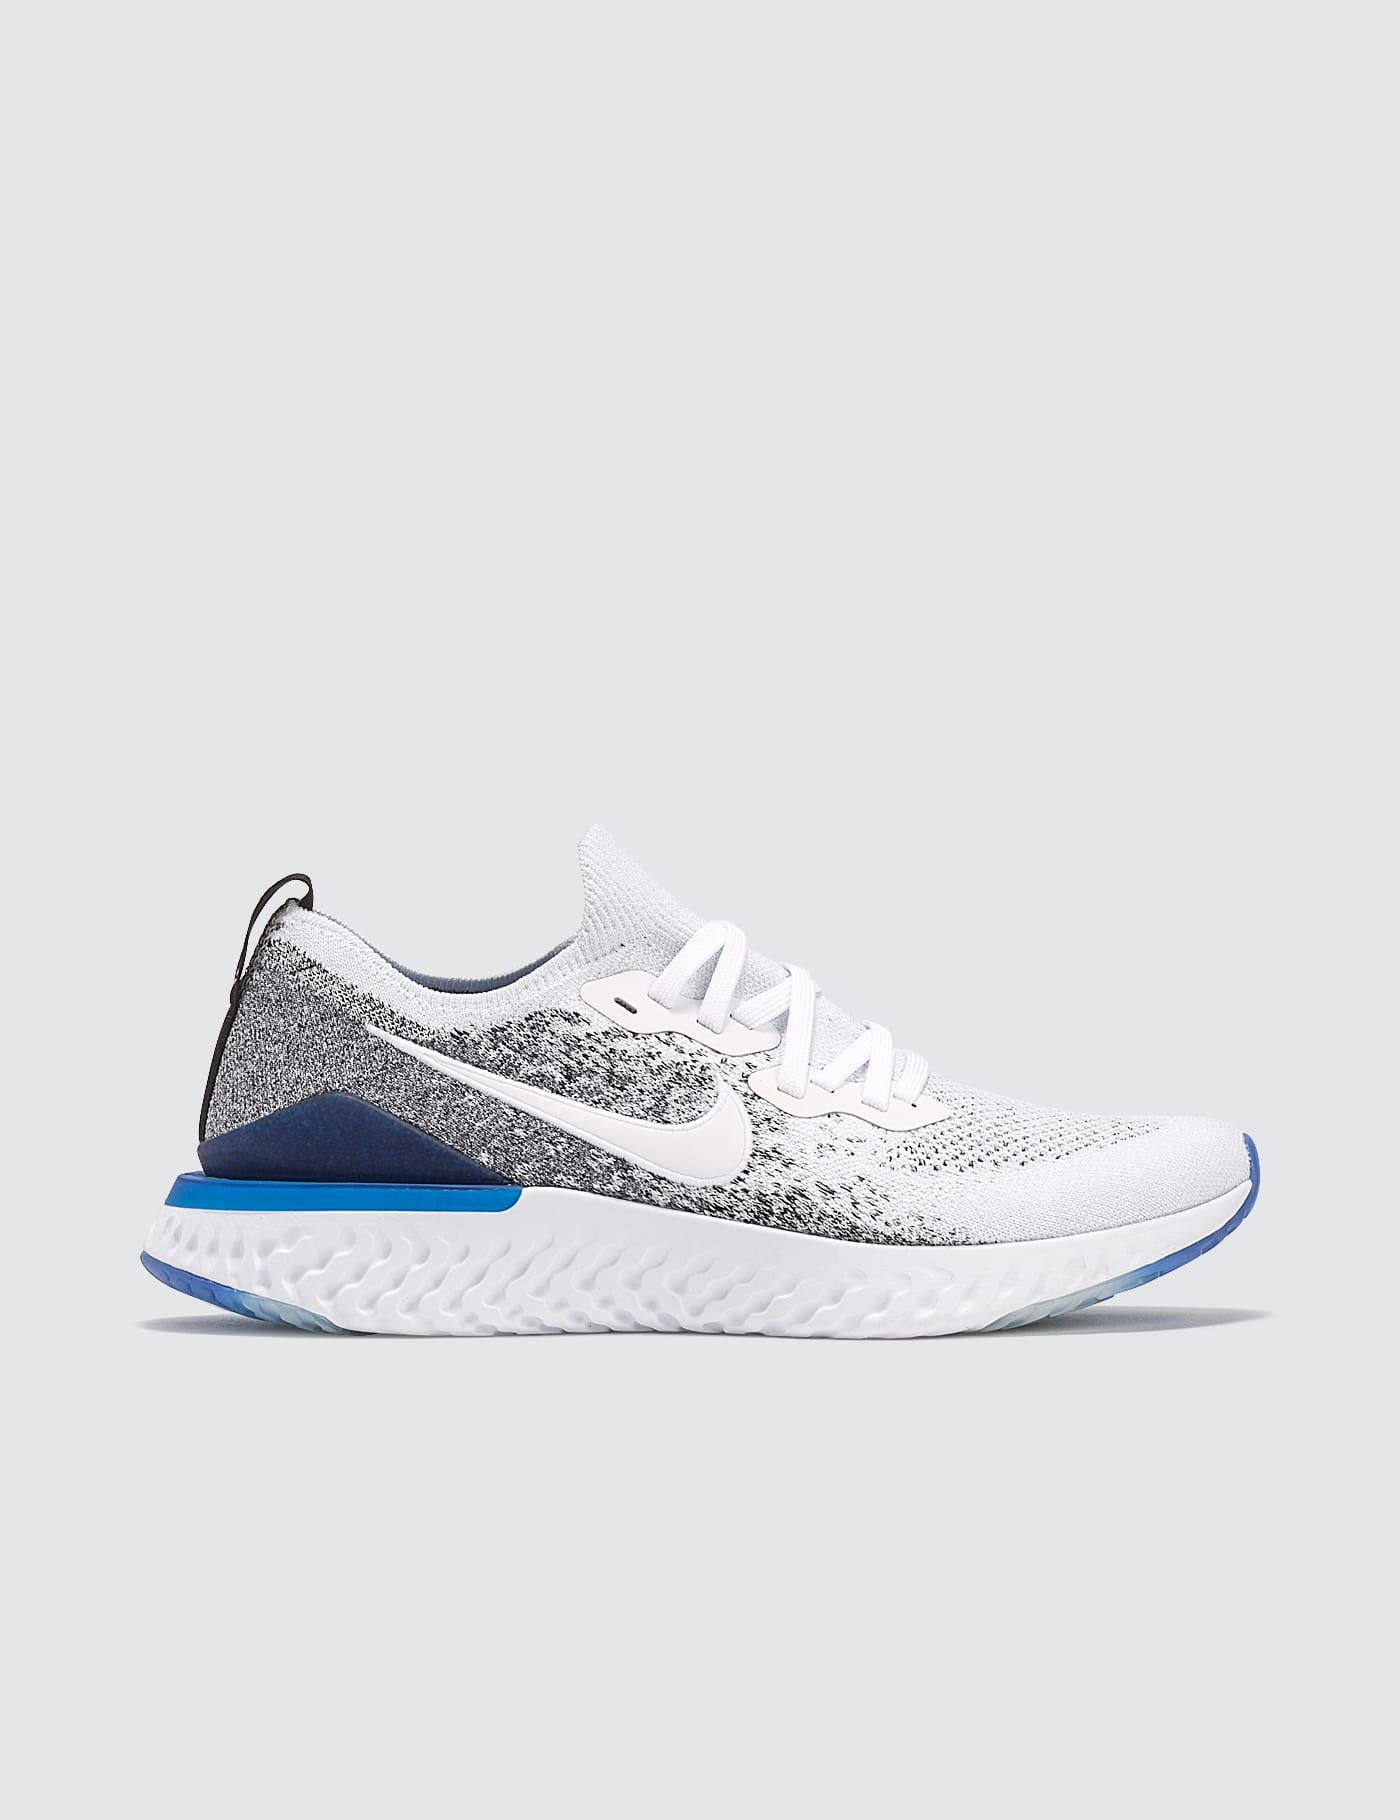 nike epic react flyknit 2 white and blue